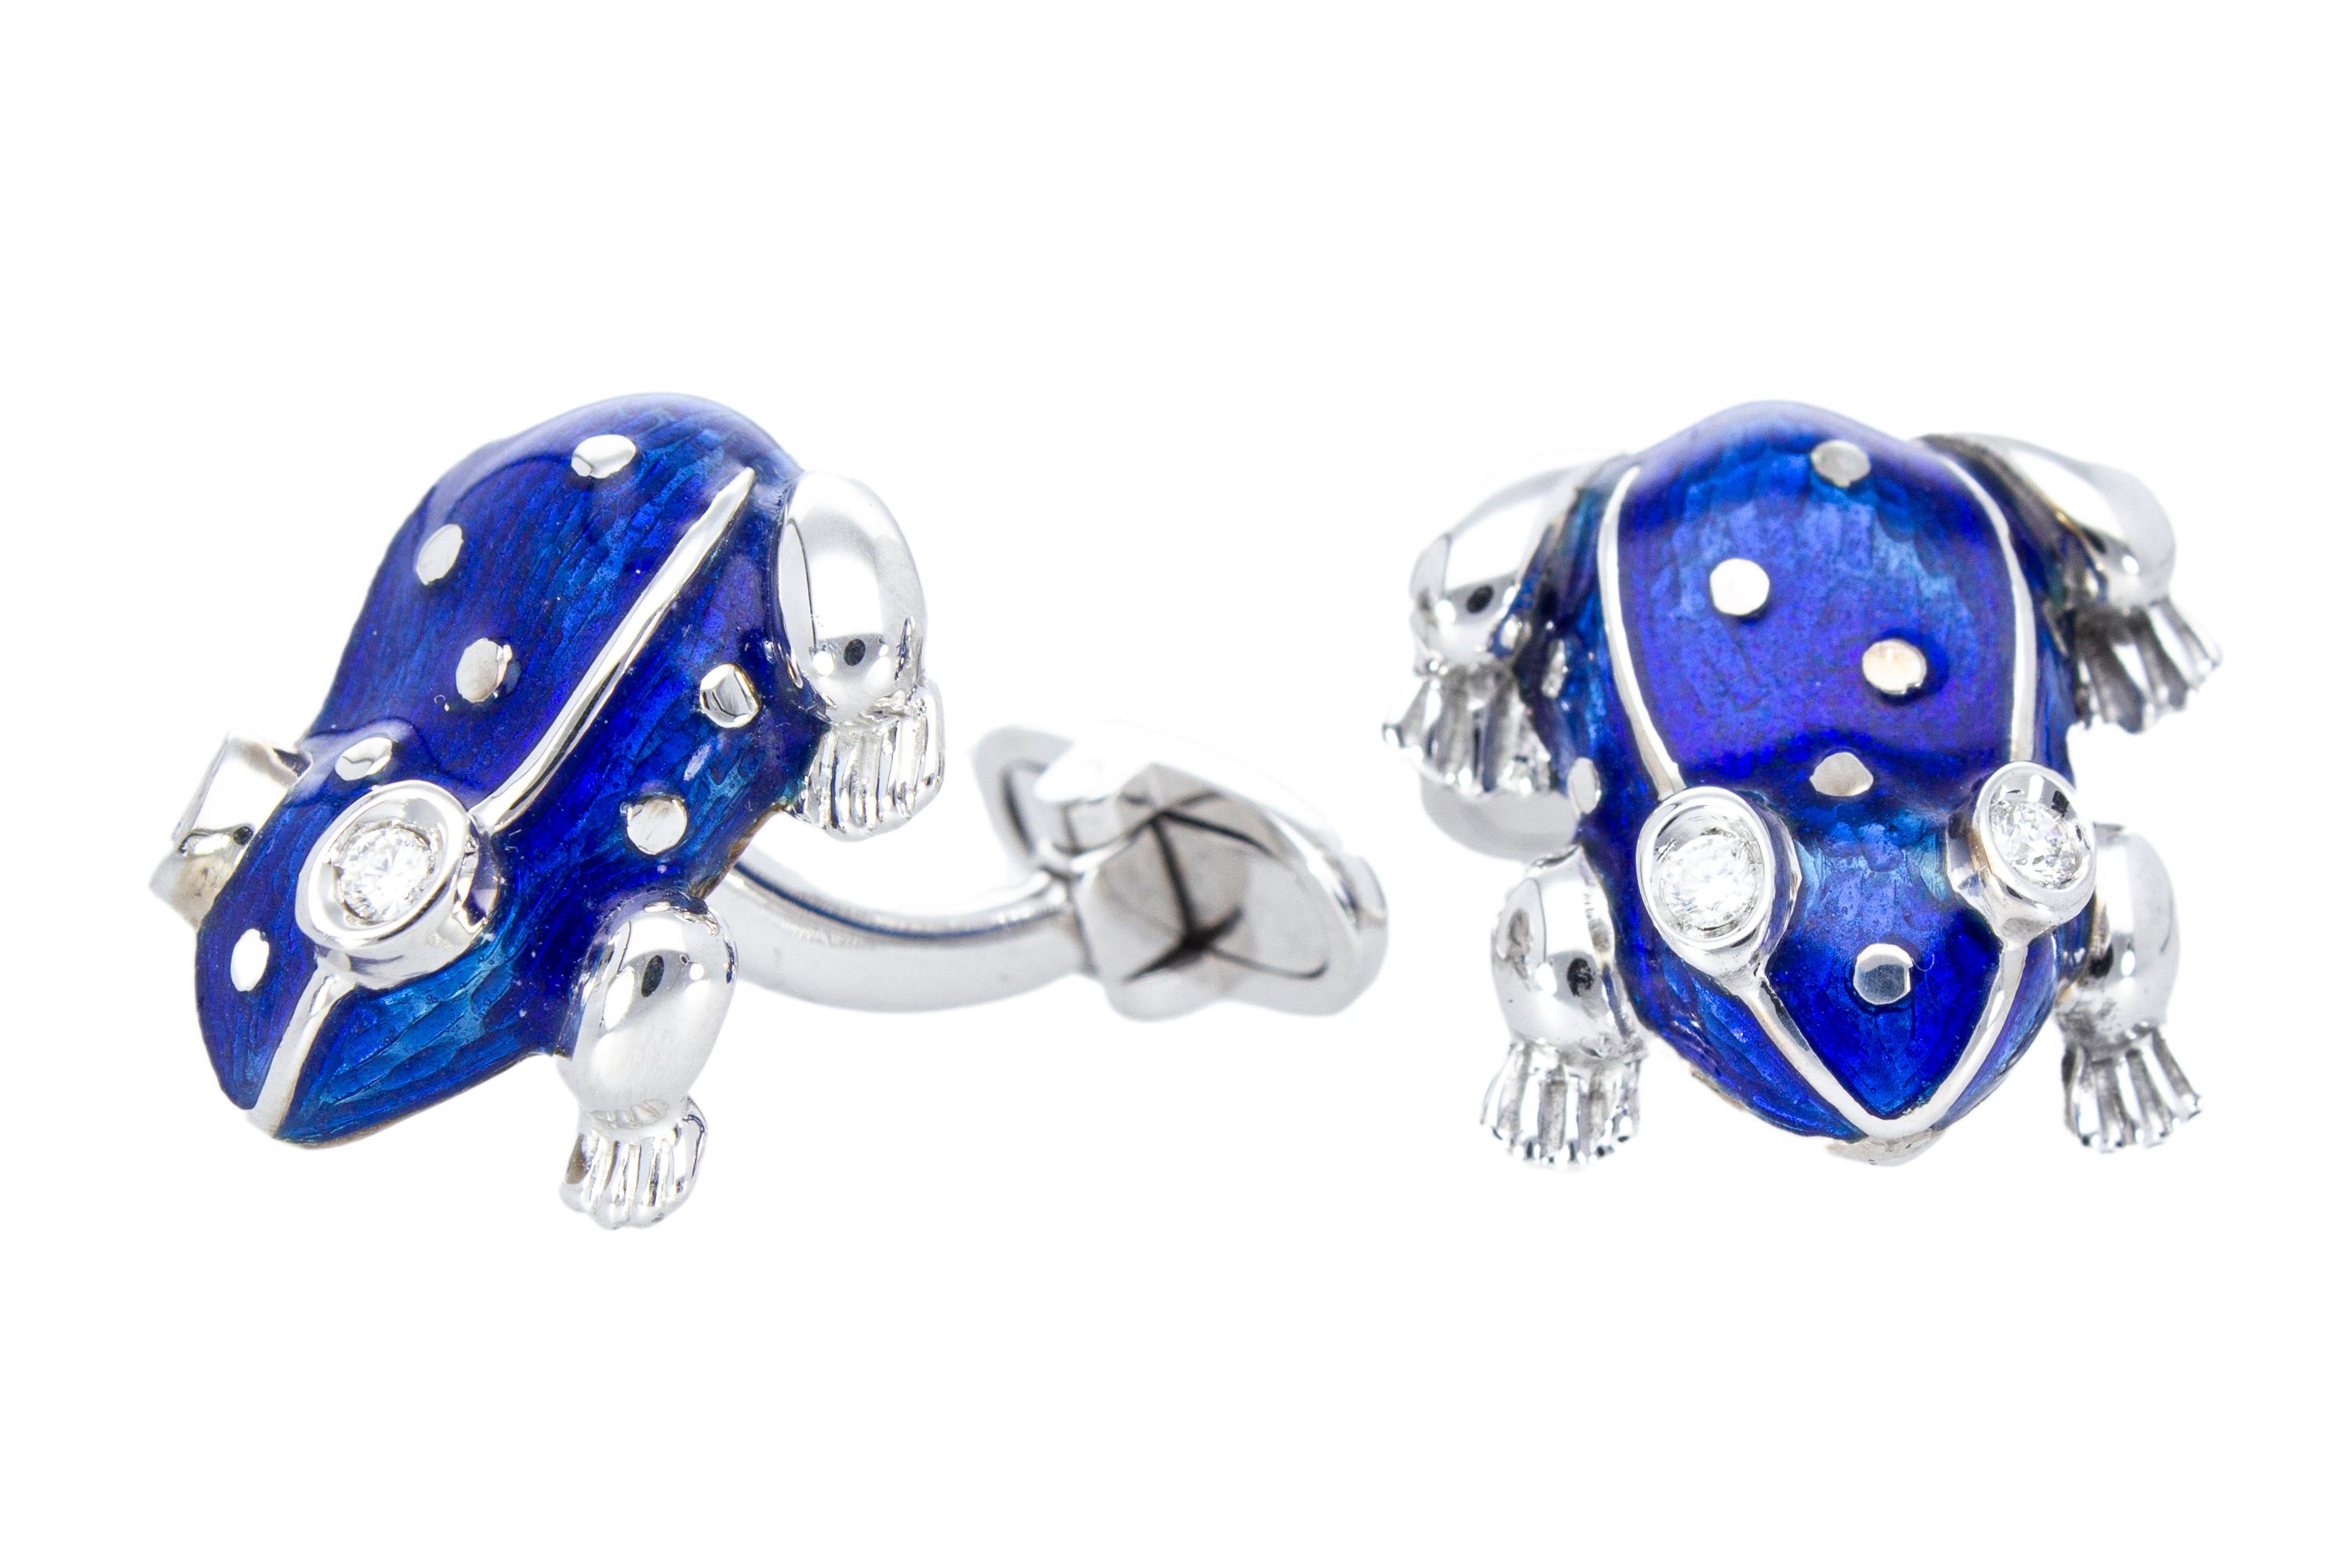 18 Kt White Gold with Blu Enamel Diamonds Frog Cufflinks Handcraft Made in Italy For Sale 12